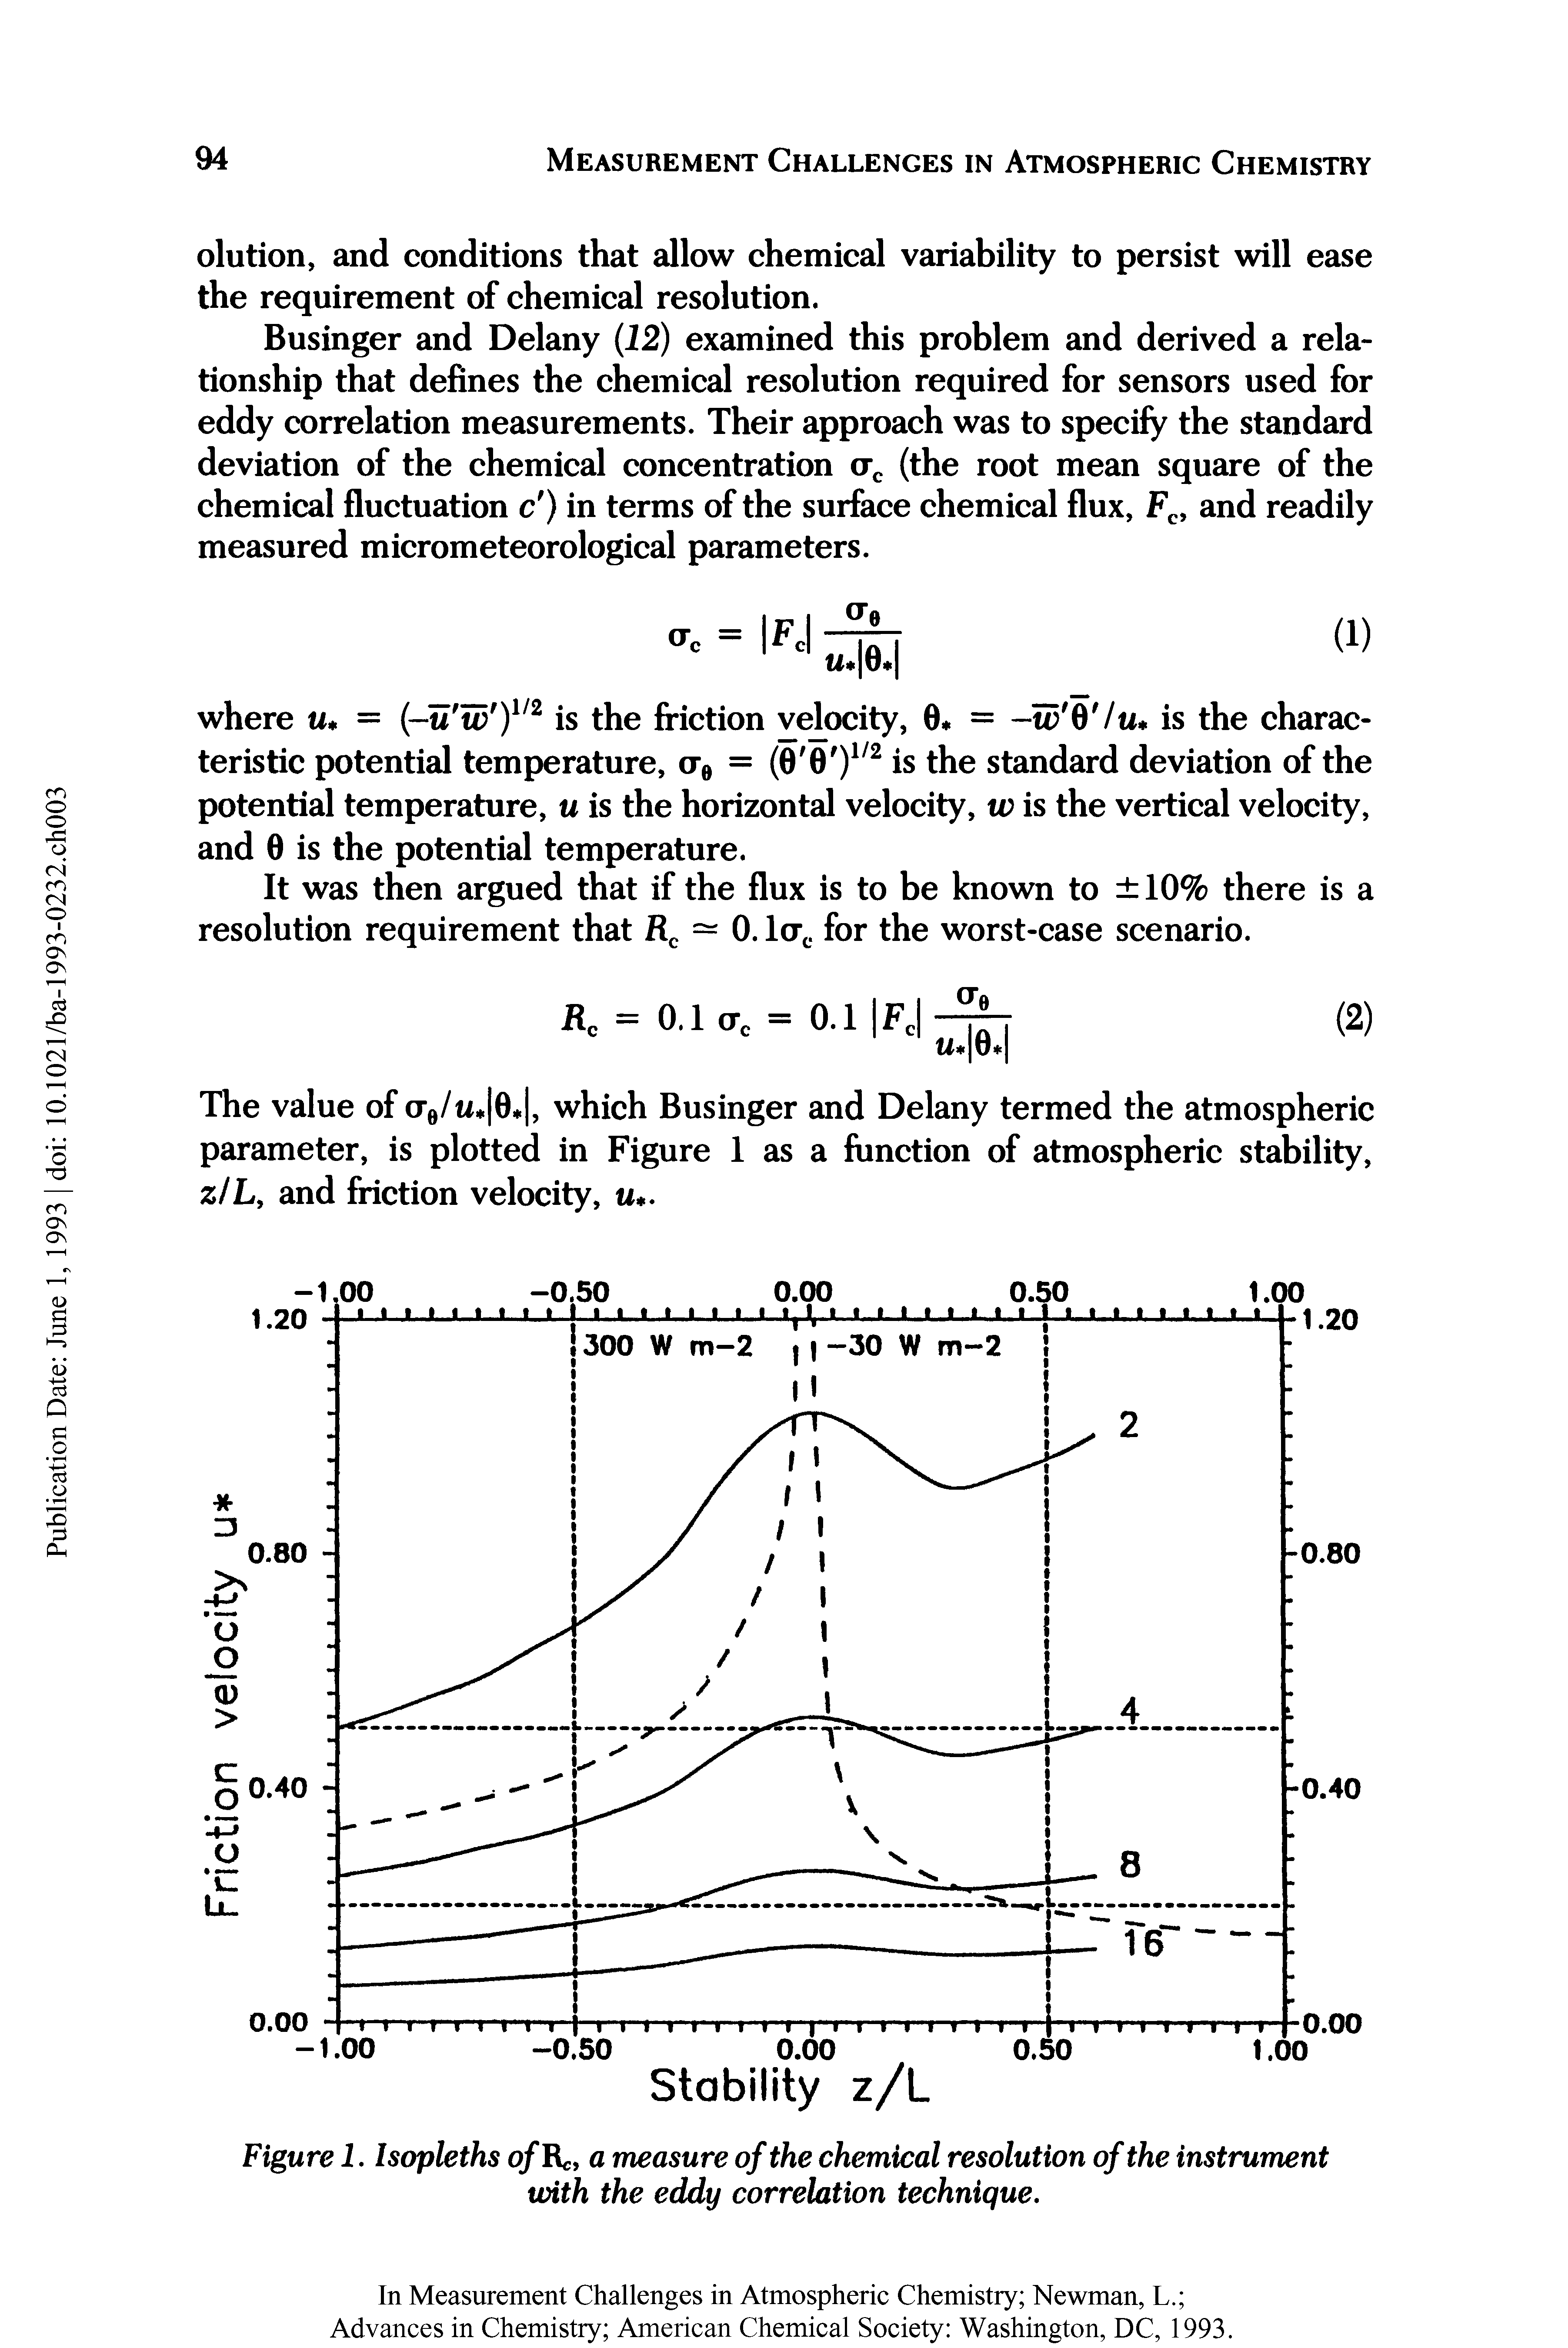 Figure 1. Isopleths o/Rc, a measure of the chemical resolution of the instrument with the eddy correlation technique.